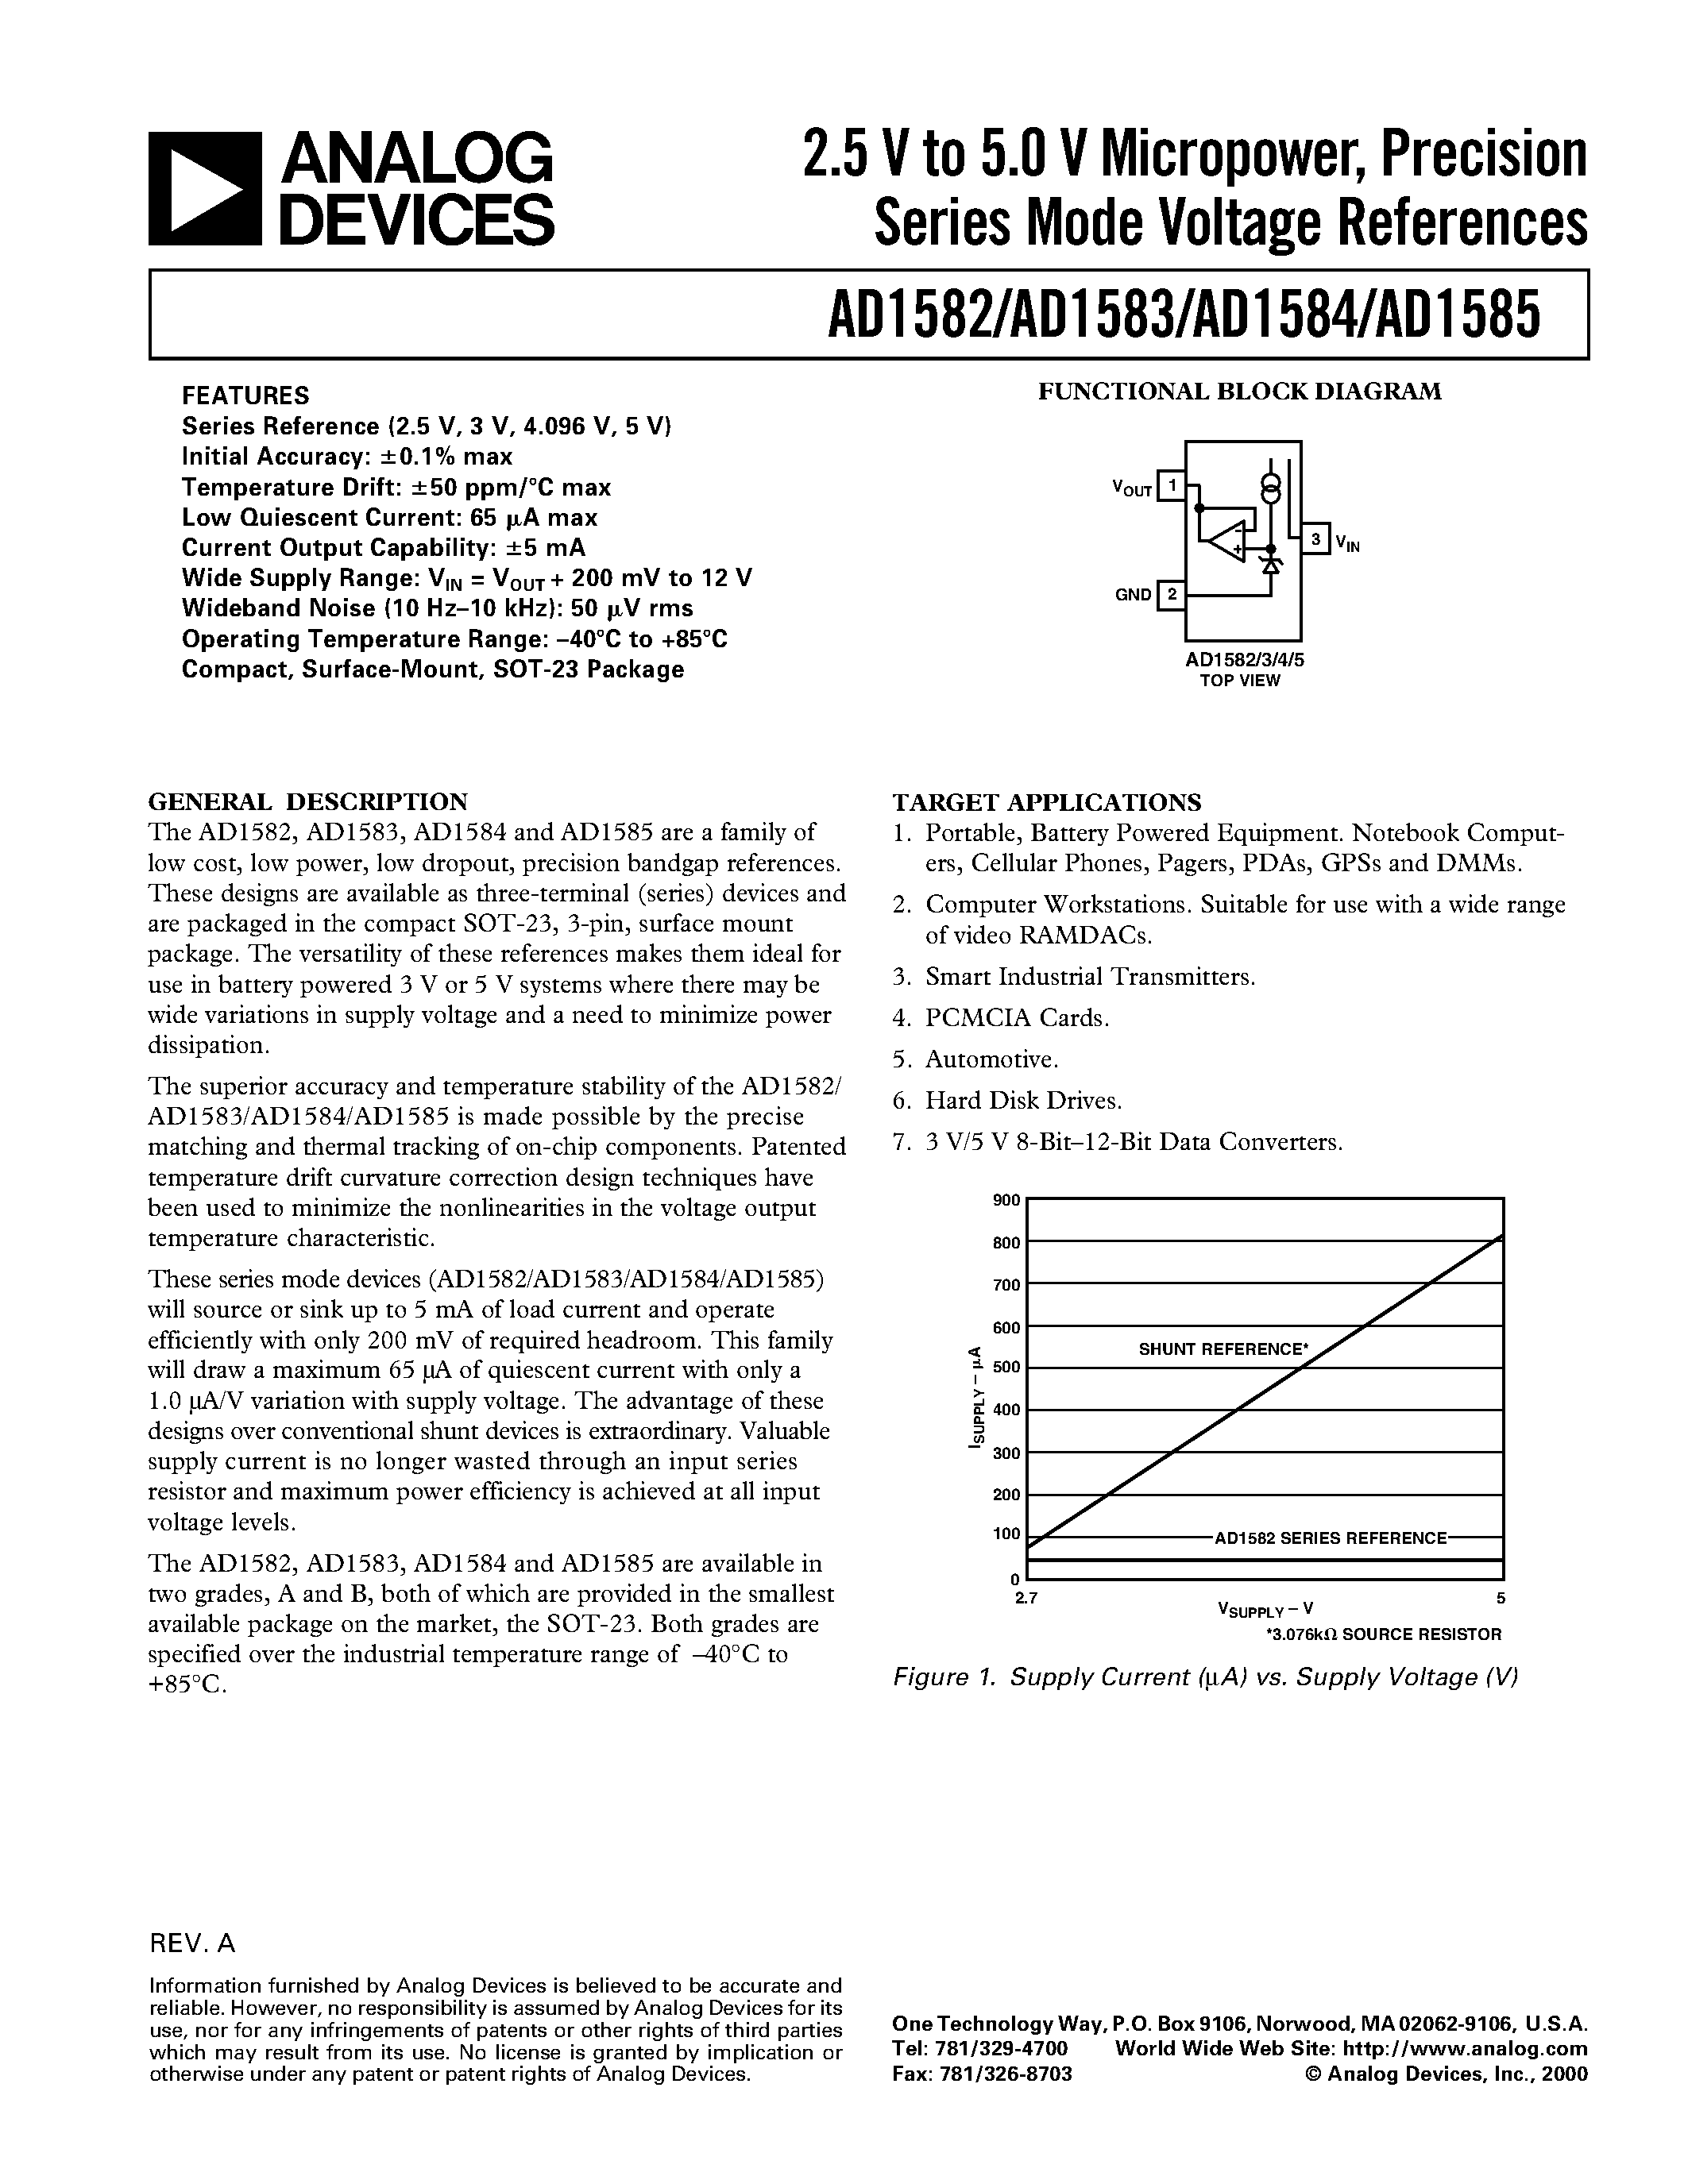 Datasheet AD1585ARTRL - 2.5 V to 5.0 V Micropower/ Precision Series Mode Voltage References page 1